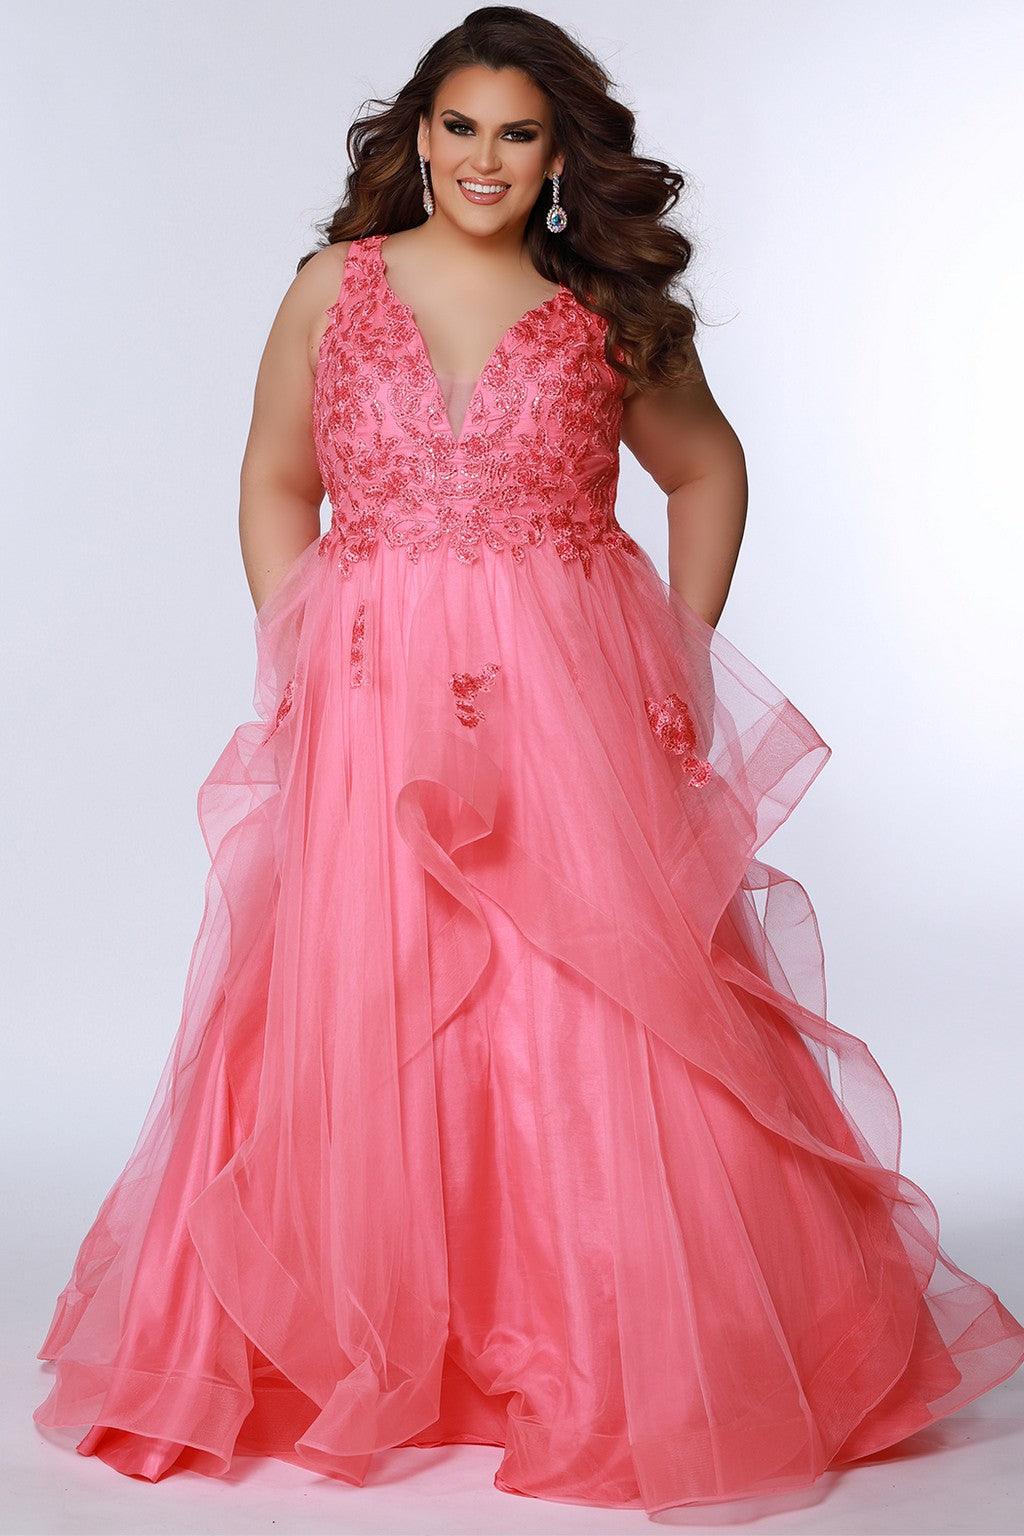 Plus Size Dresses Plus Size Long Sleeveless Prom Ball Gown Coral